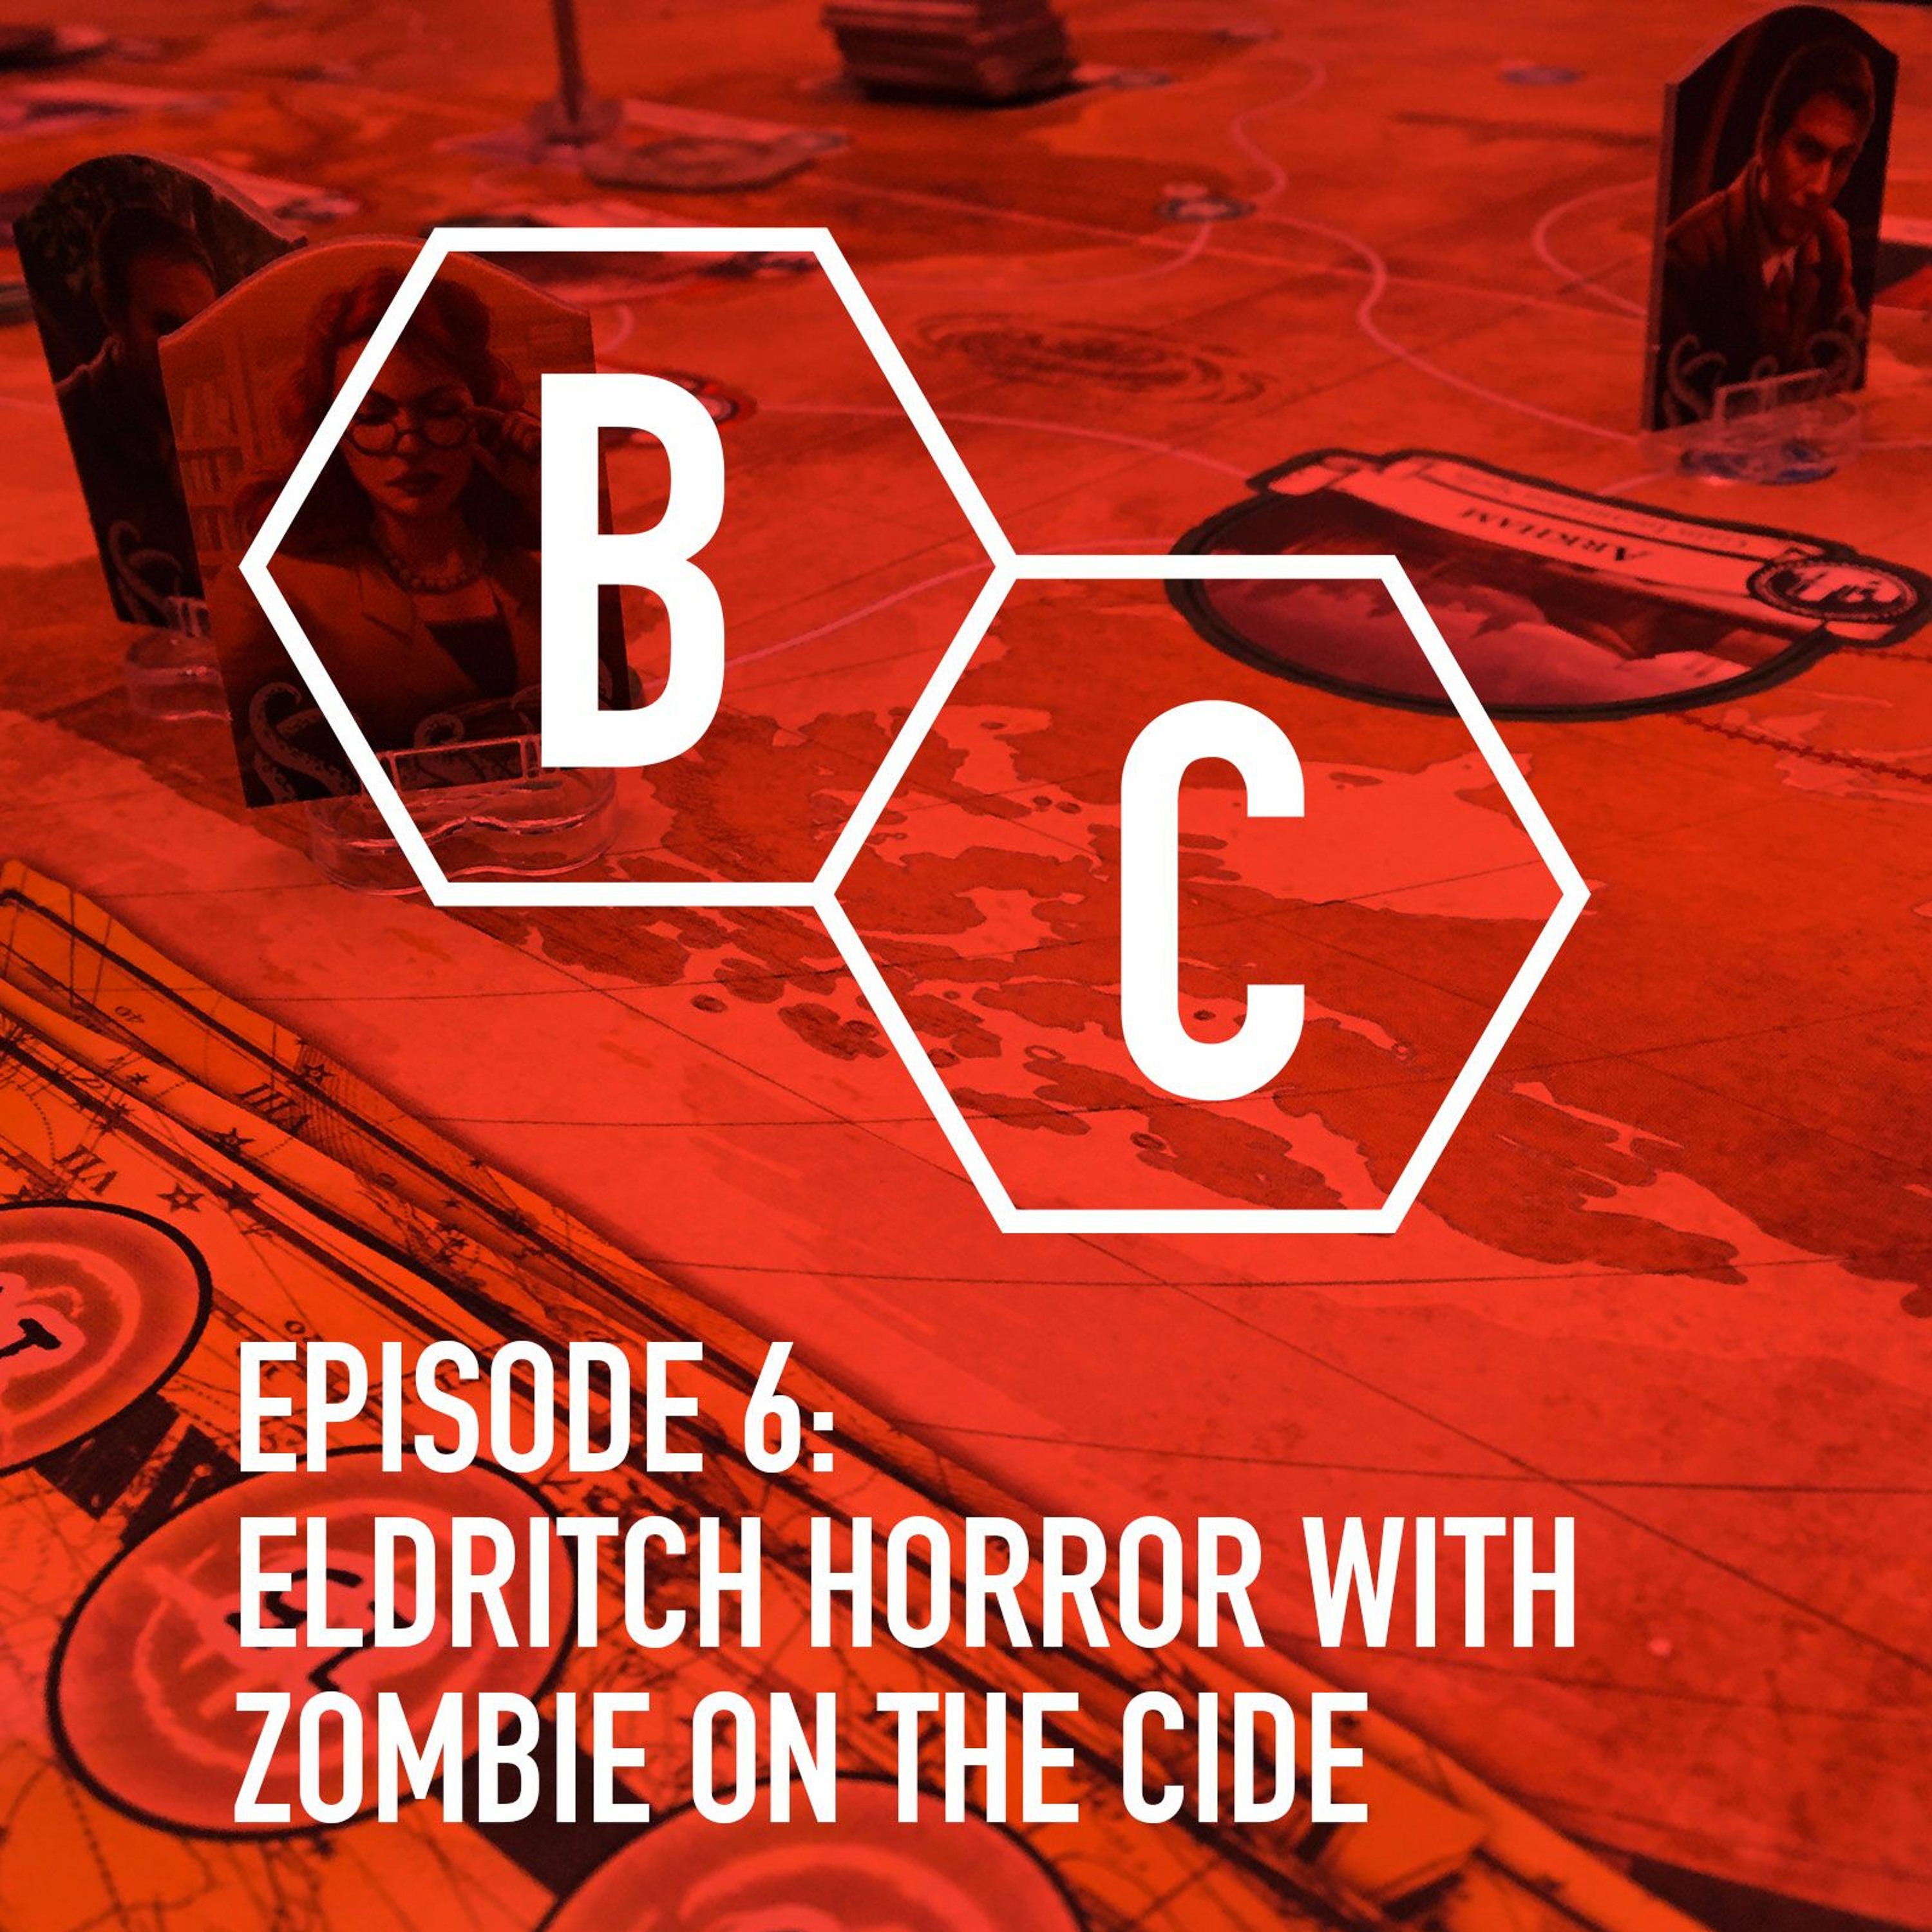 Episode 6 - Eldritch Horror with Zombie on the Cide